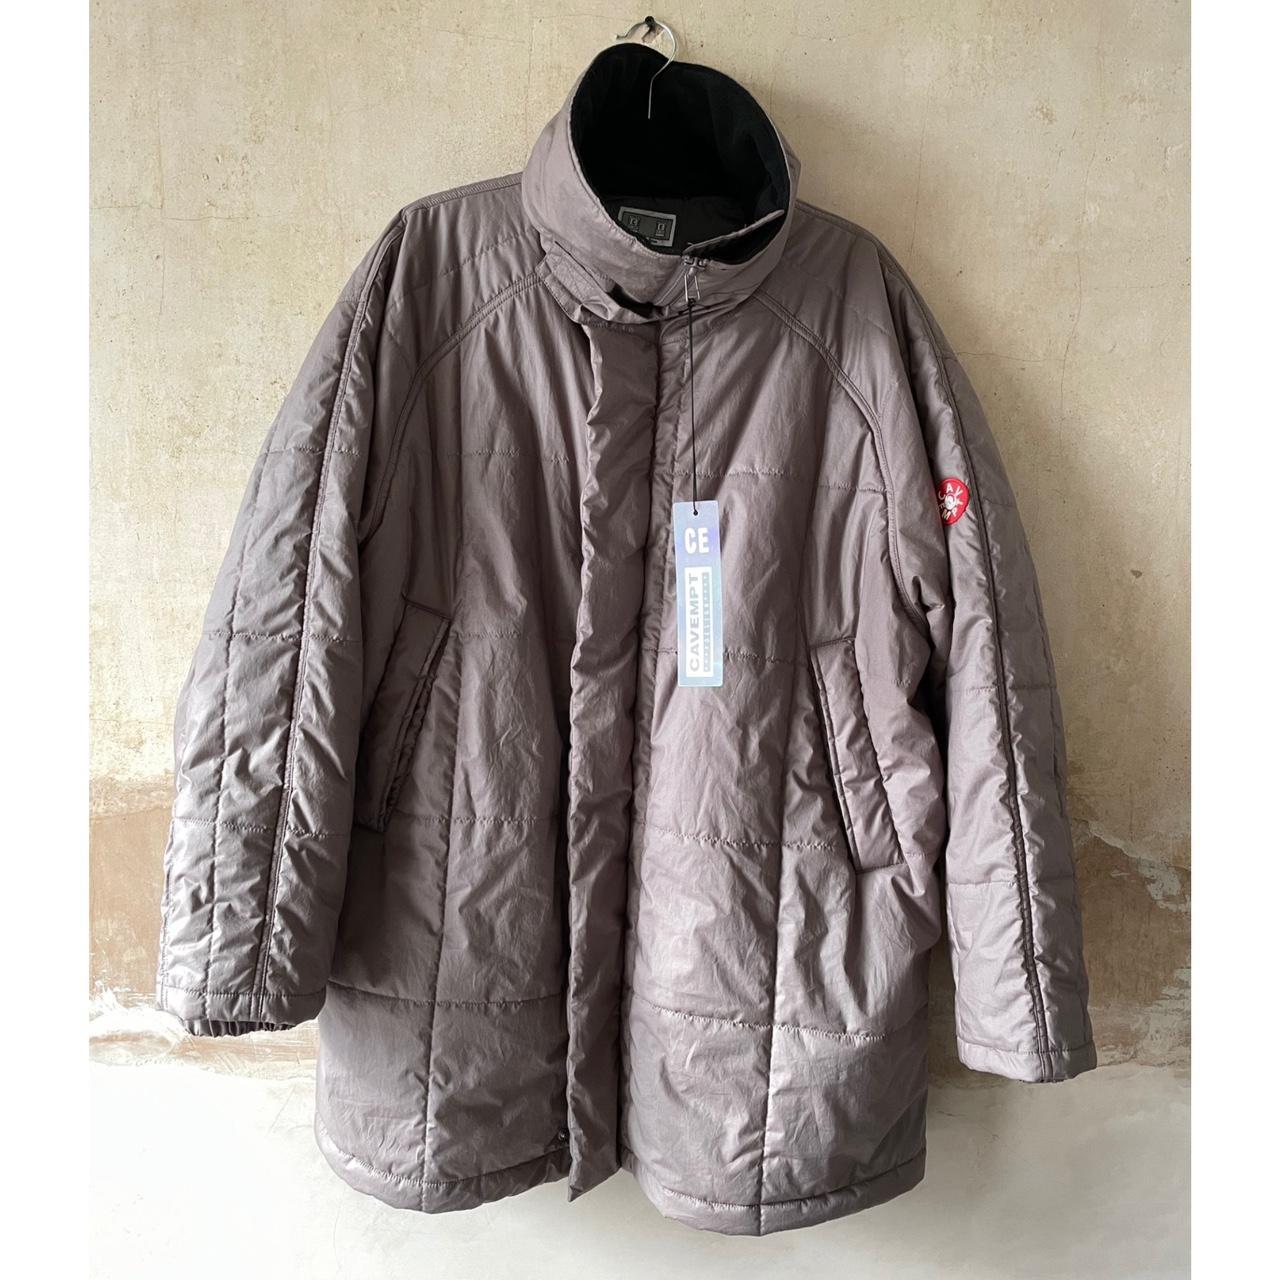 C.E CAV EMPT AW 15 QUILTING JACKET 日本全国の正規取扱店 www.tunic